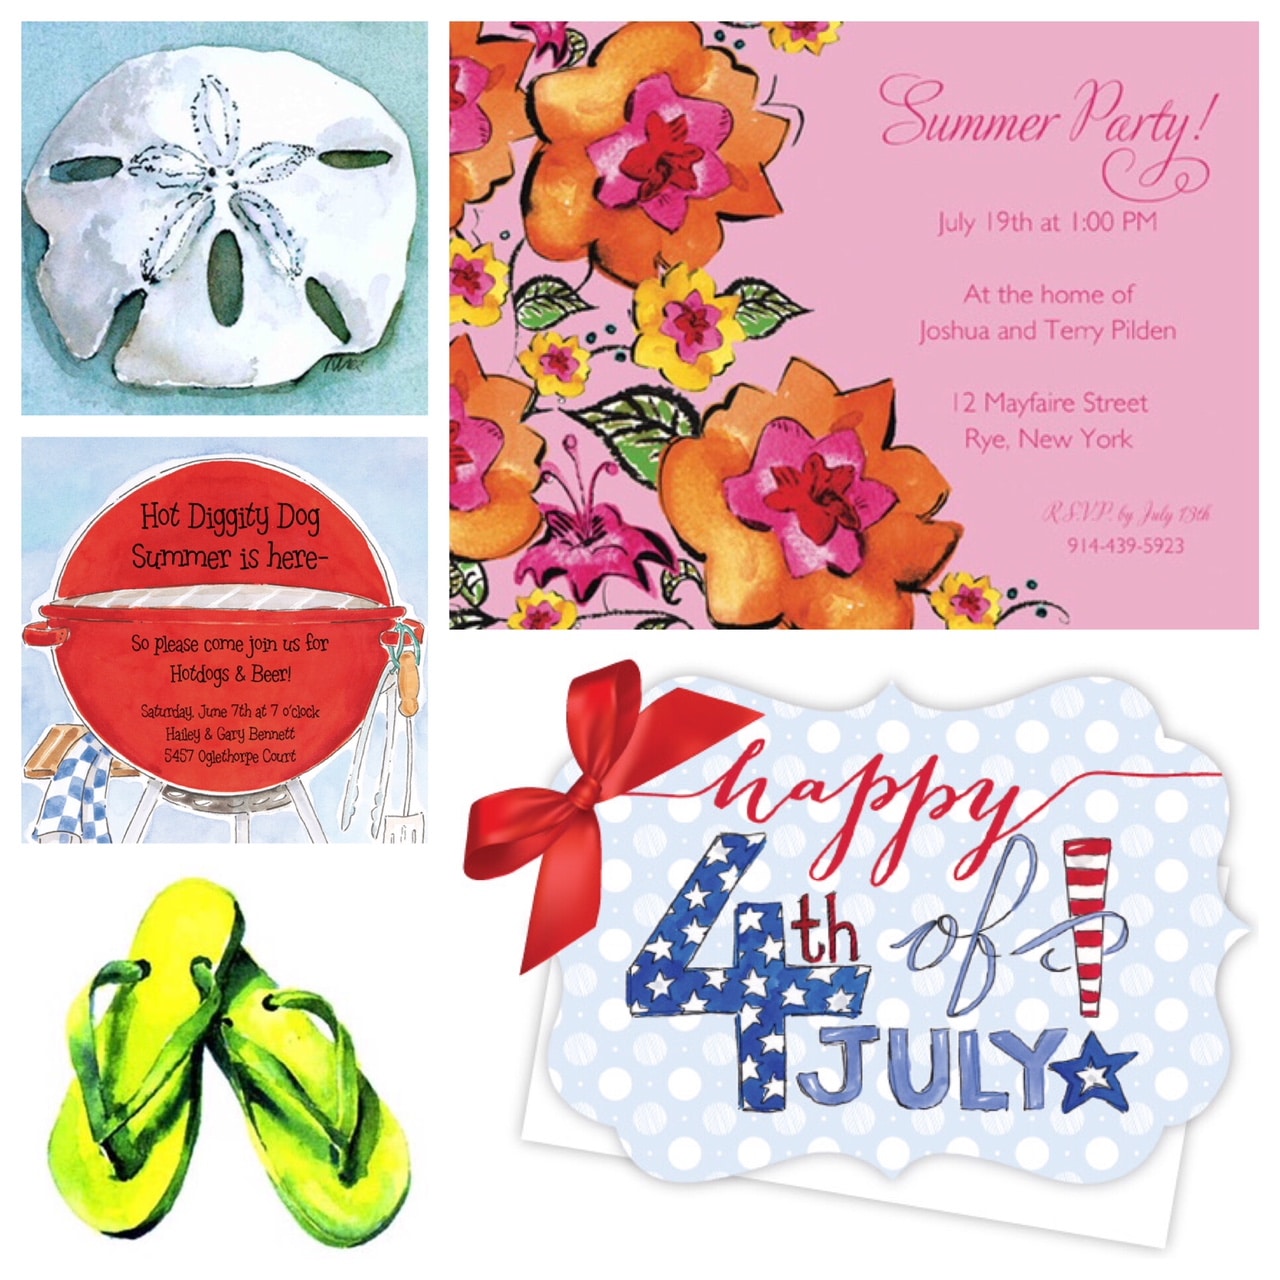 Top 10 Summer Invites So Good You’ll Want To Throw A Party